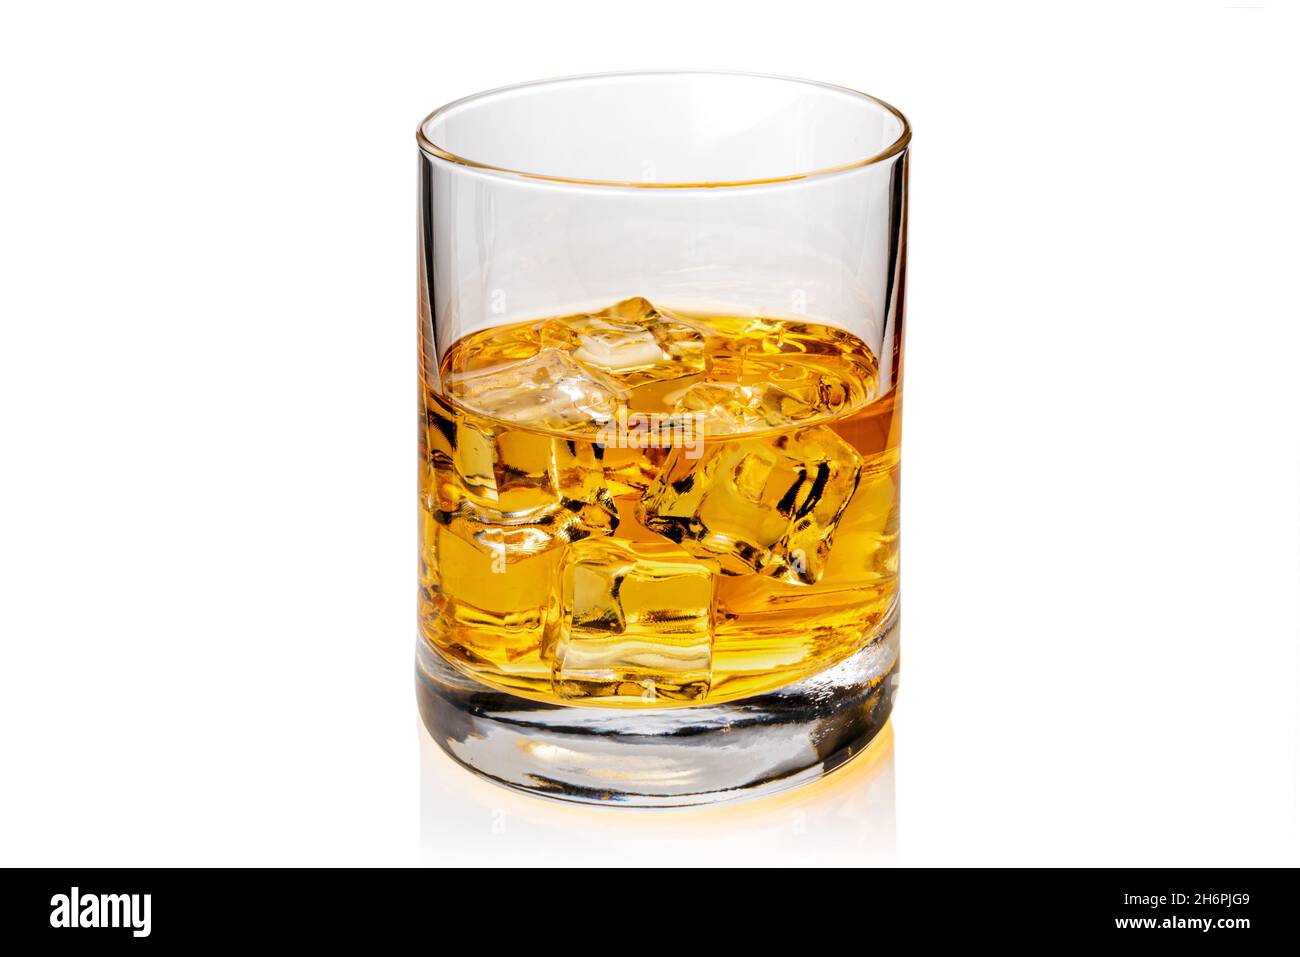 https://c8.alamy.com/comp/2H6PJG9/glass-of-whiskey-or-whisky-or-american-kentucky-bourbon-with-ice-cubes-with-its-reflection-on-the-plan-isolated-on-white-2H6PJG9.jpg